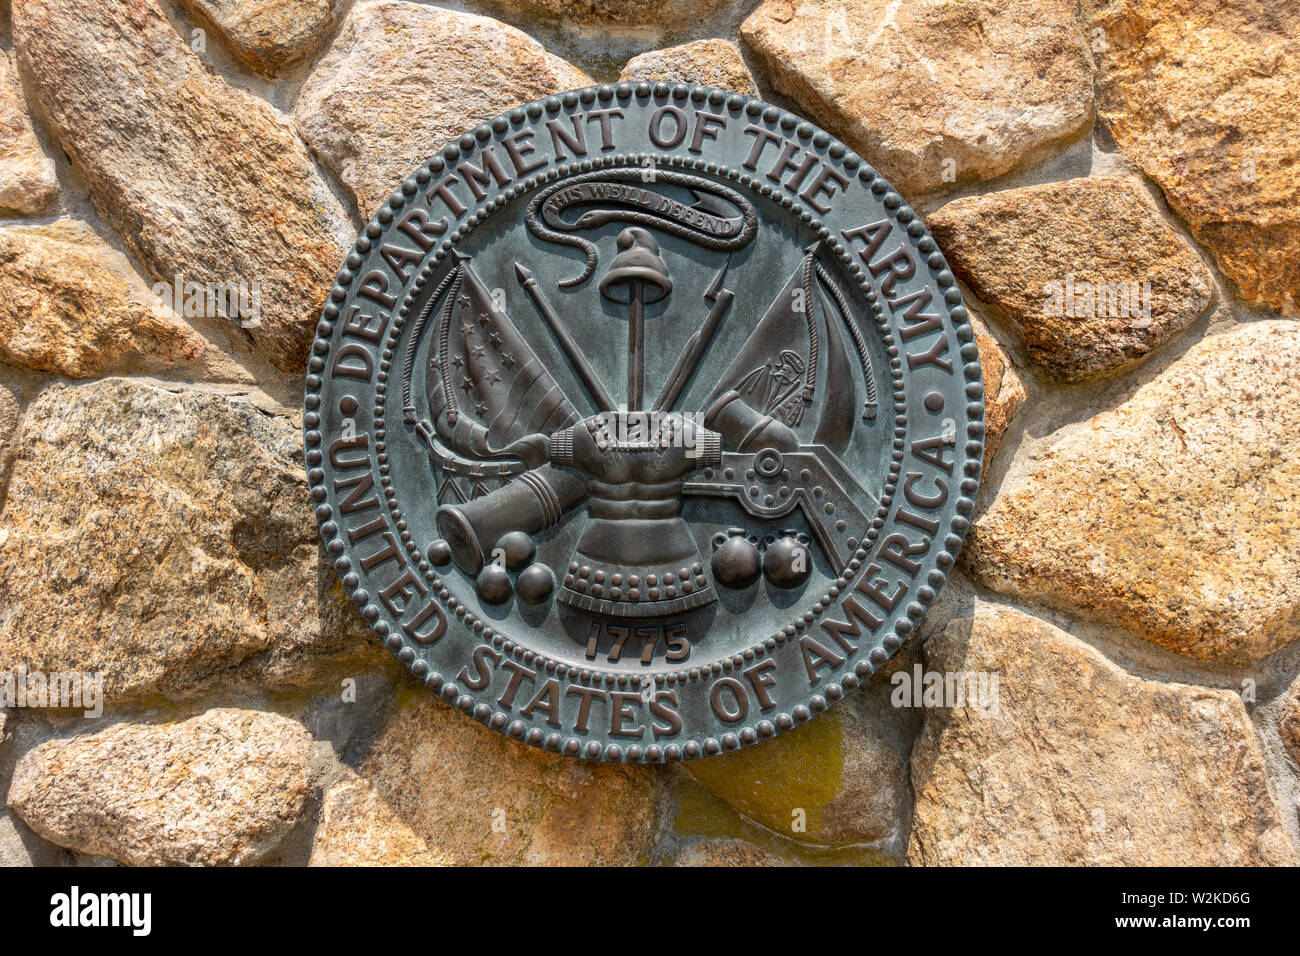 United States of America Department of the Army plaque at National Cemetery in Bourne, Cape Cod, Massachusetts USA Stock Photo